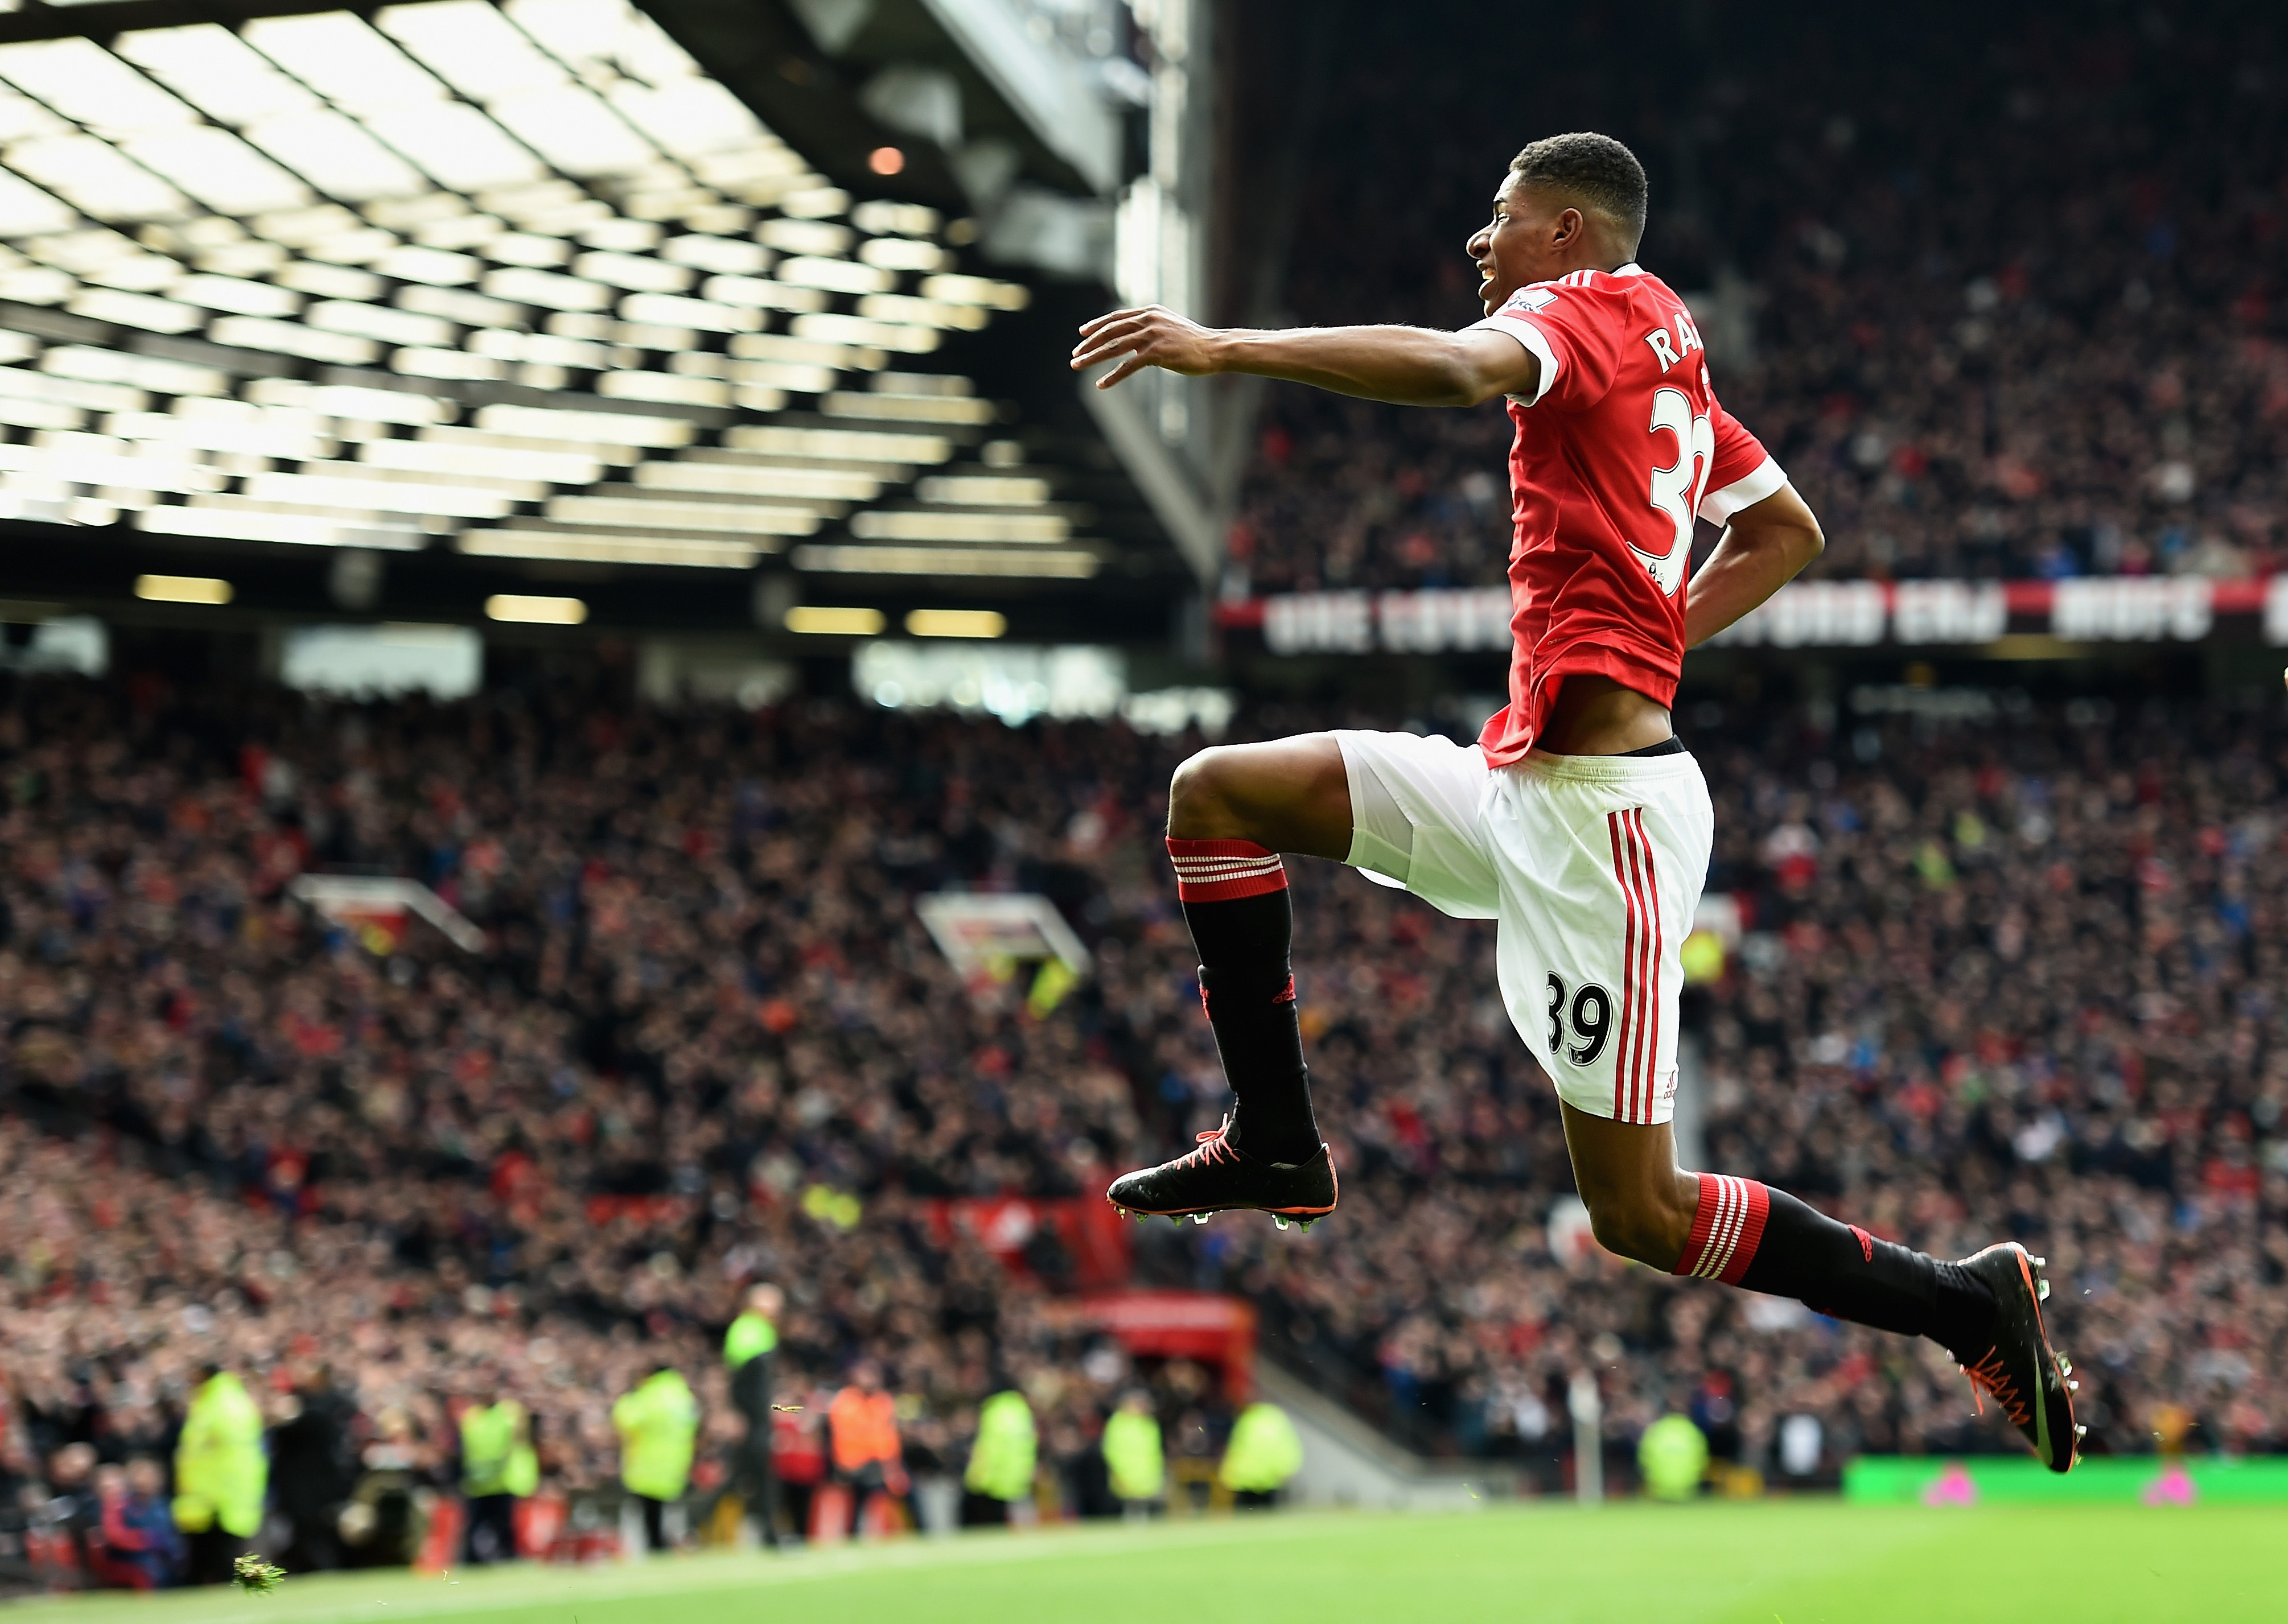 Marcus Rashford seems to have built a hype at Old Trafford similar to what Cristiano Ronaldo did in his early years at Old Trafford and the teenager has revealed that the Portuguese was an inspirational figure growing up. (Picture Courtesy - AFP/Getty Images)